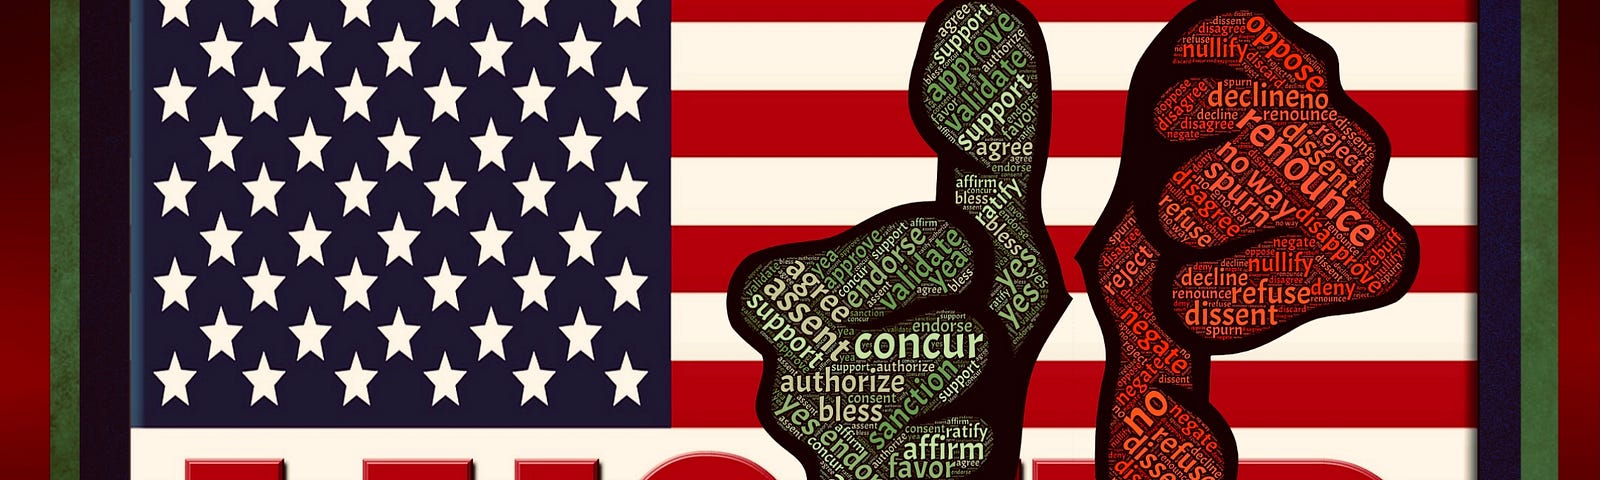 A US flag, the words I VOTED, and green thumbs up hand with positive words and a red thumbs down hand with negative words